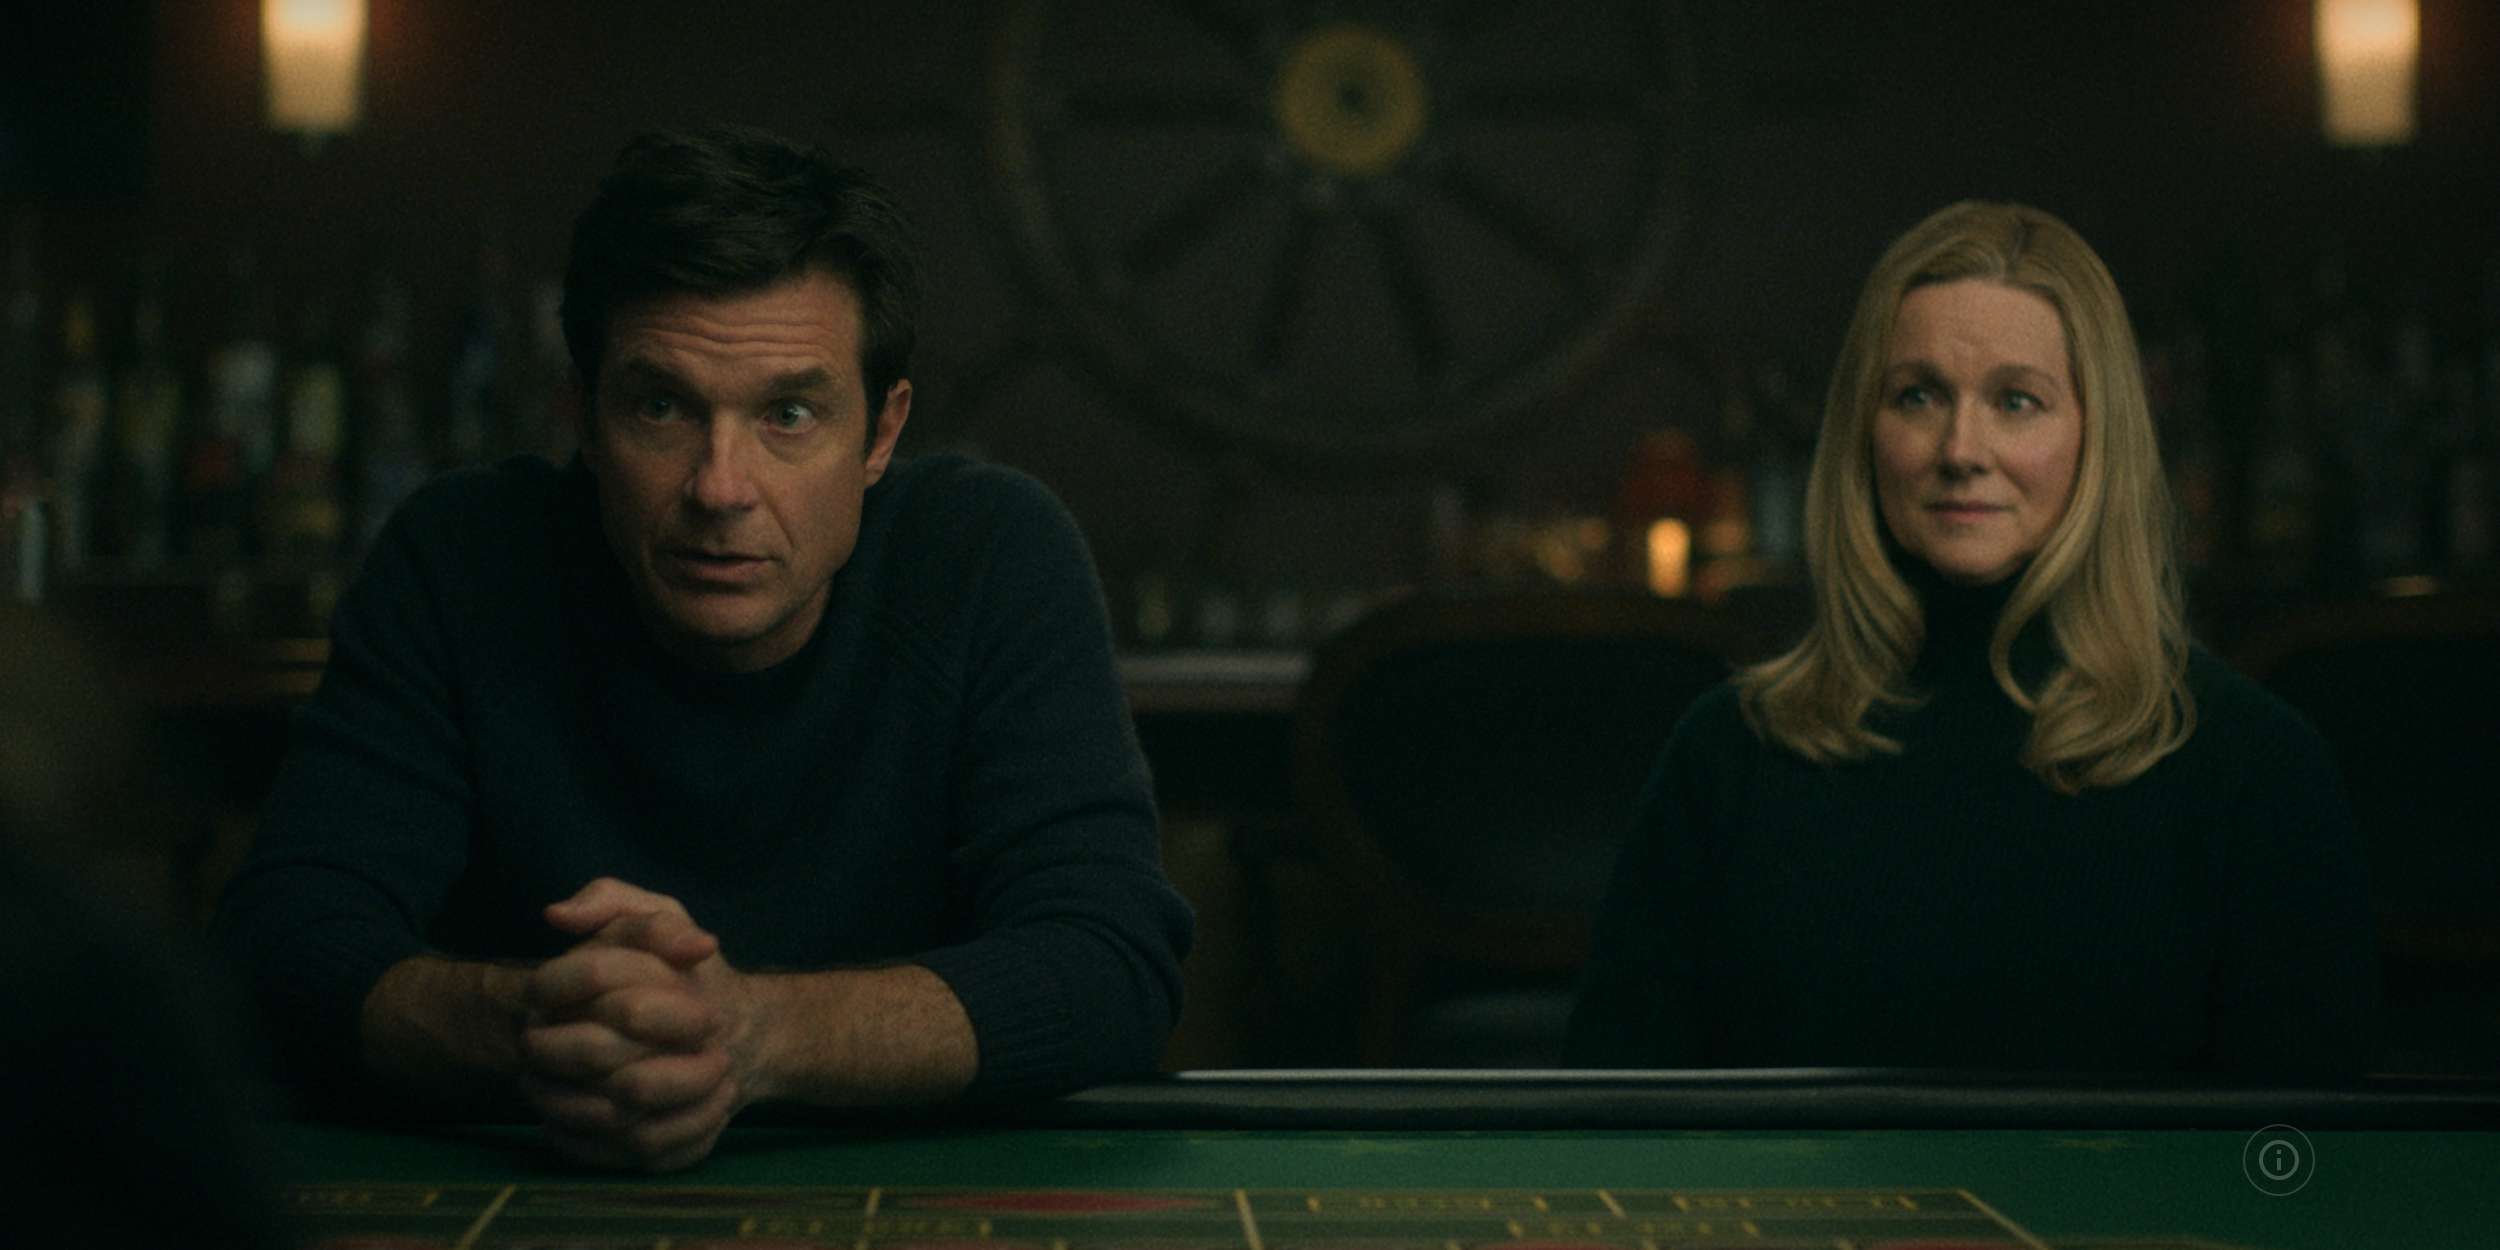 Marty and Wendy Byrd are seated at a poker table in the Netflix series Ozark